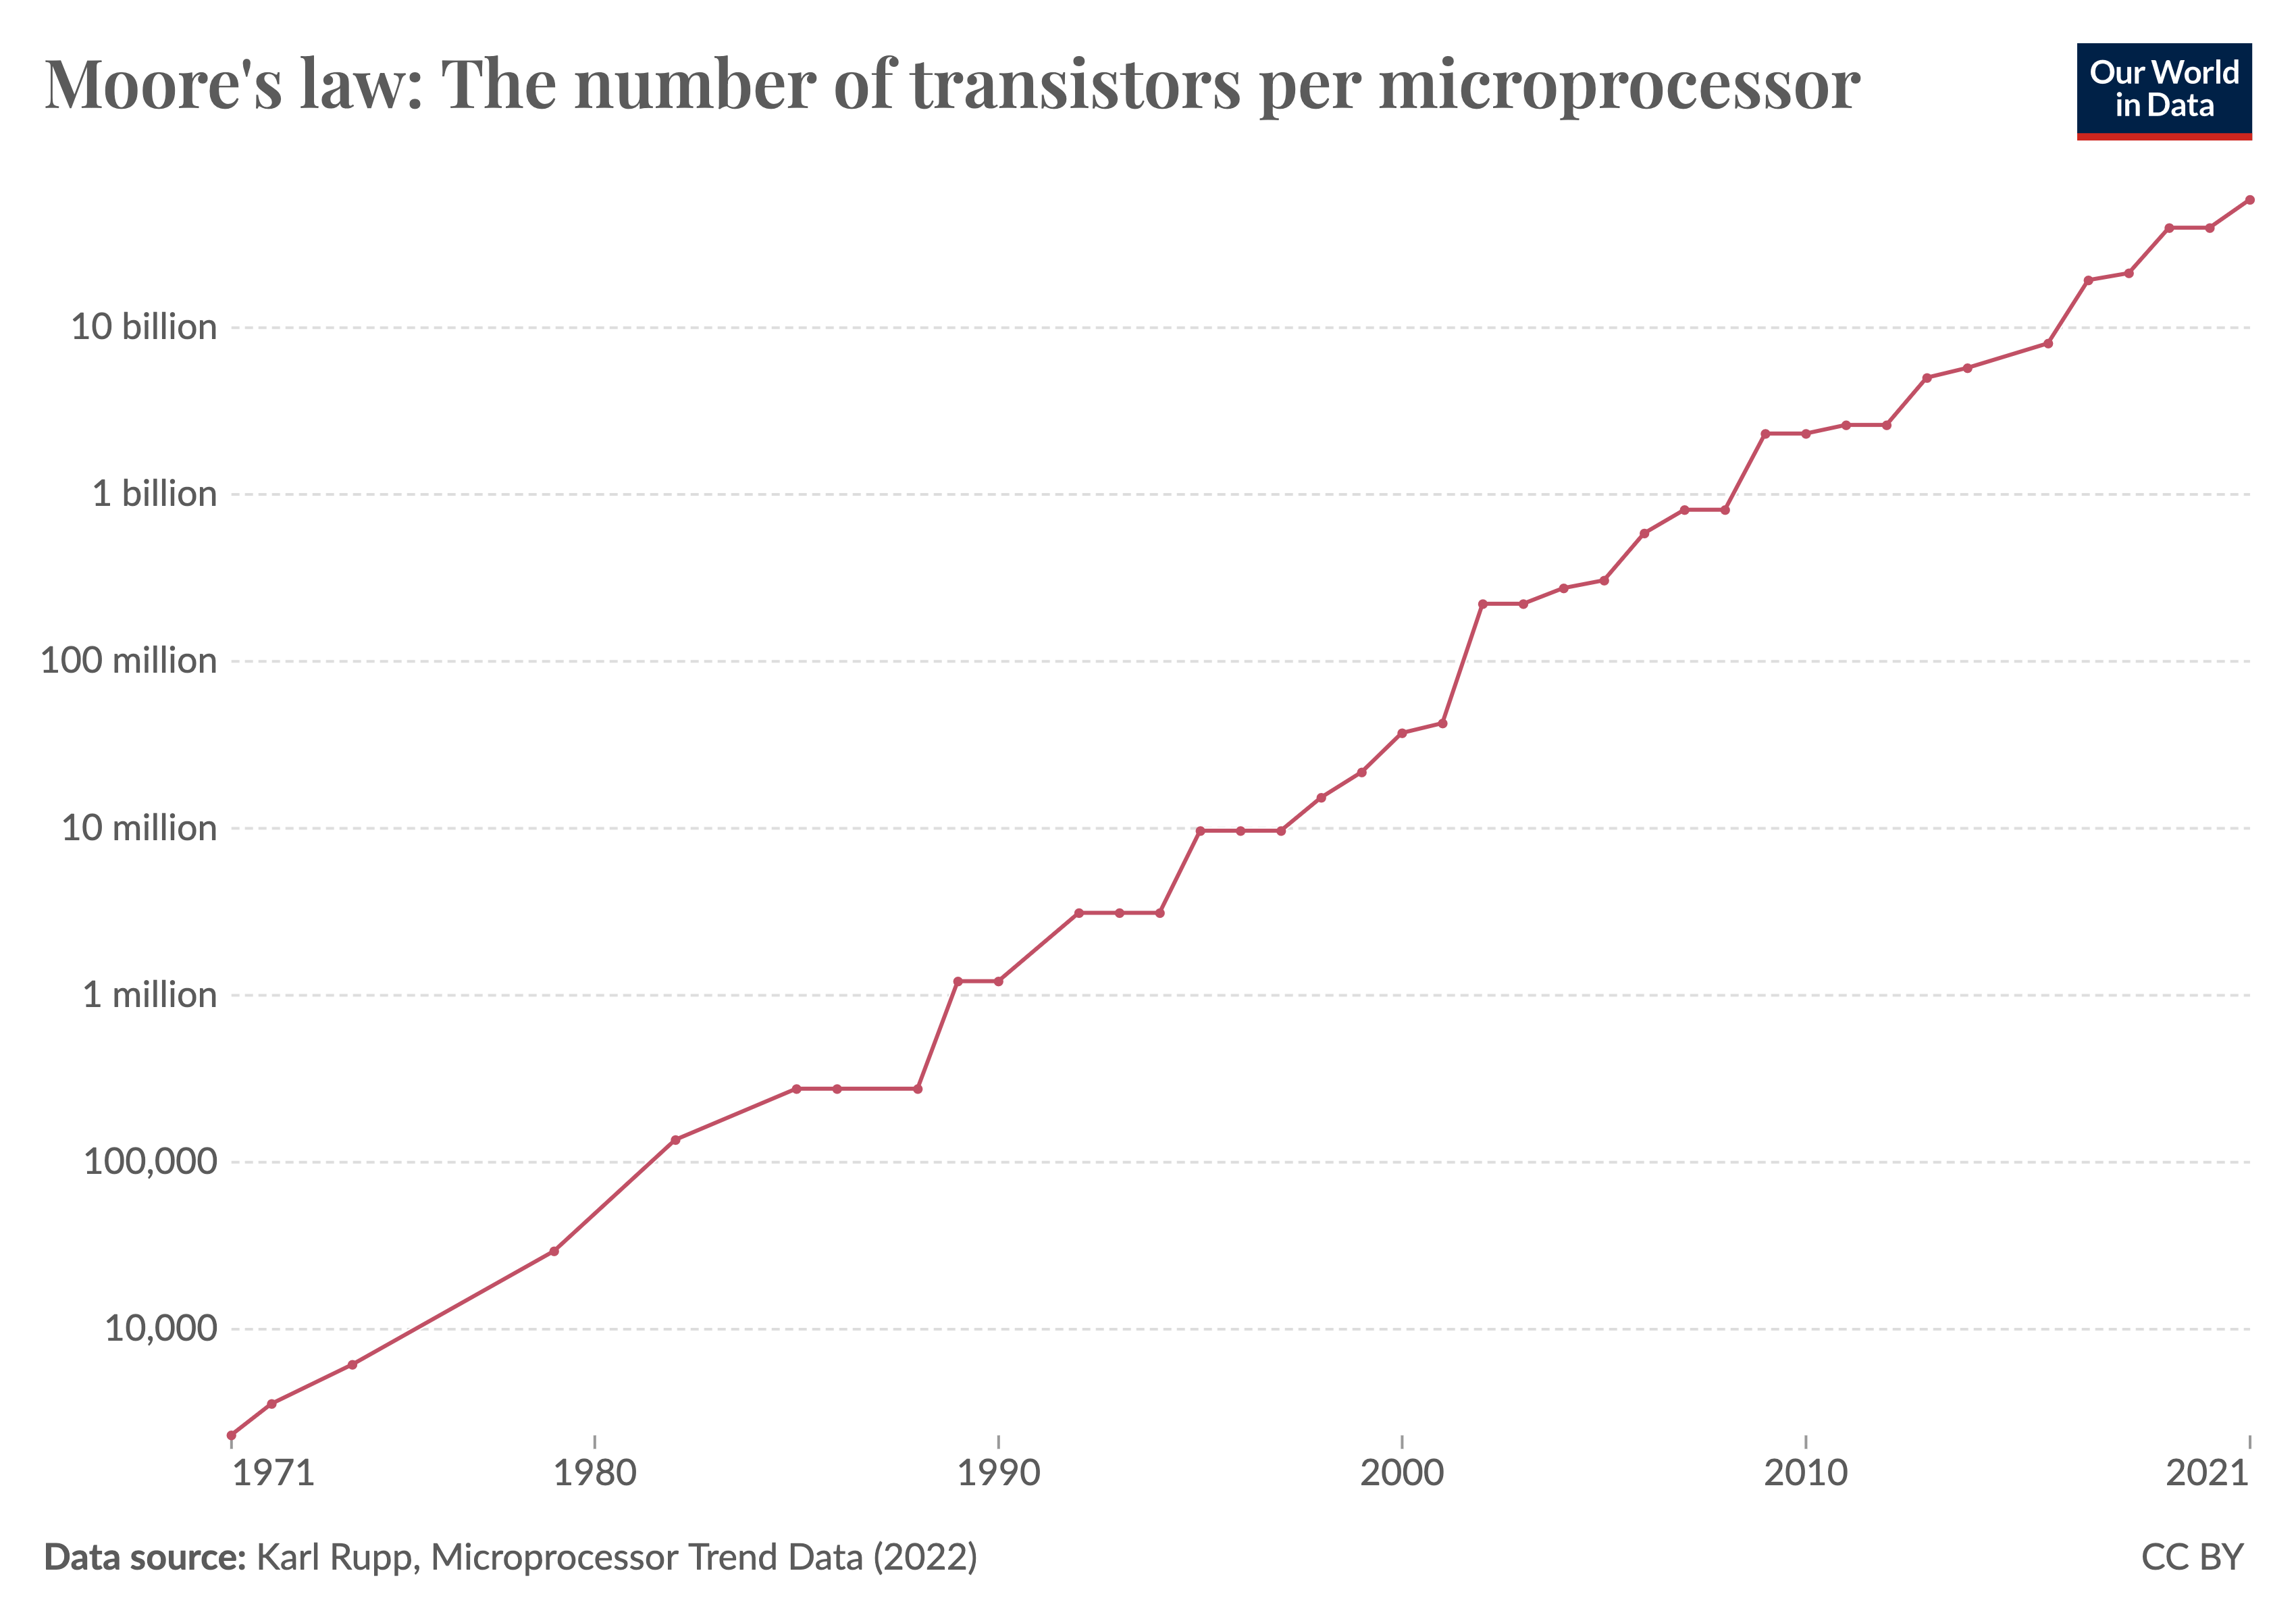 A chart showing the exponential growth of transistor counts from 1971 to 2021